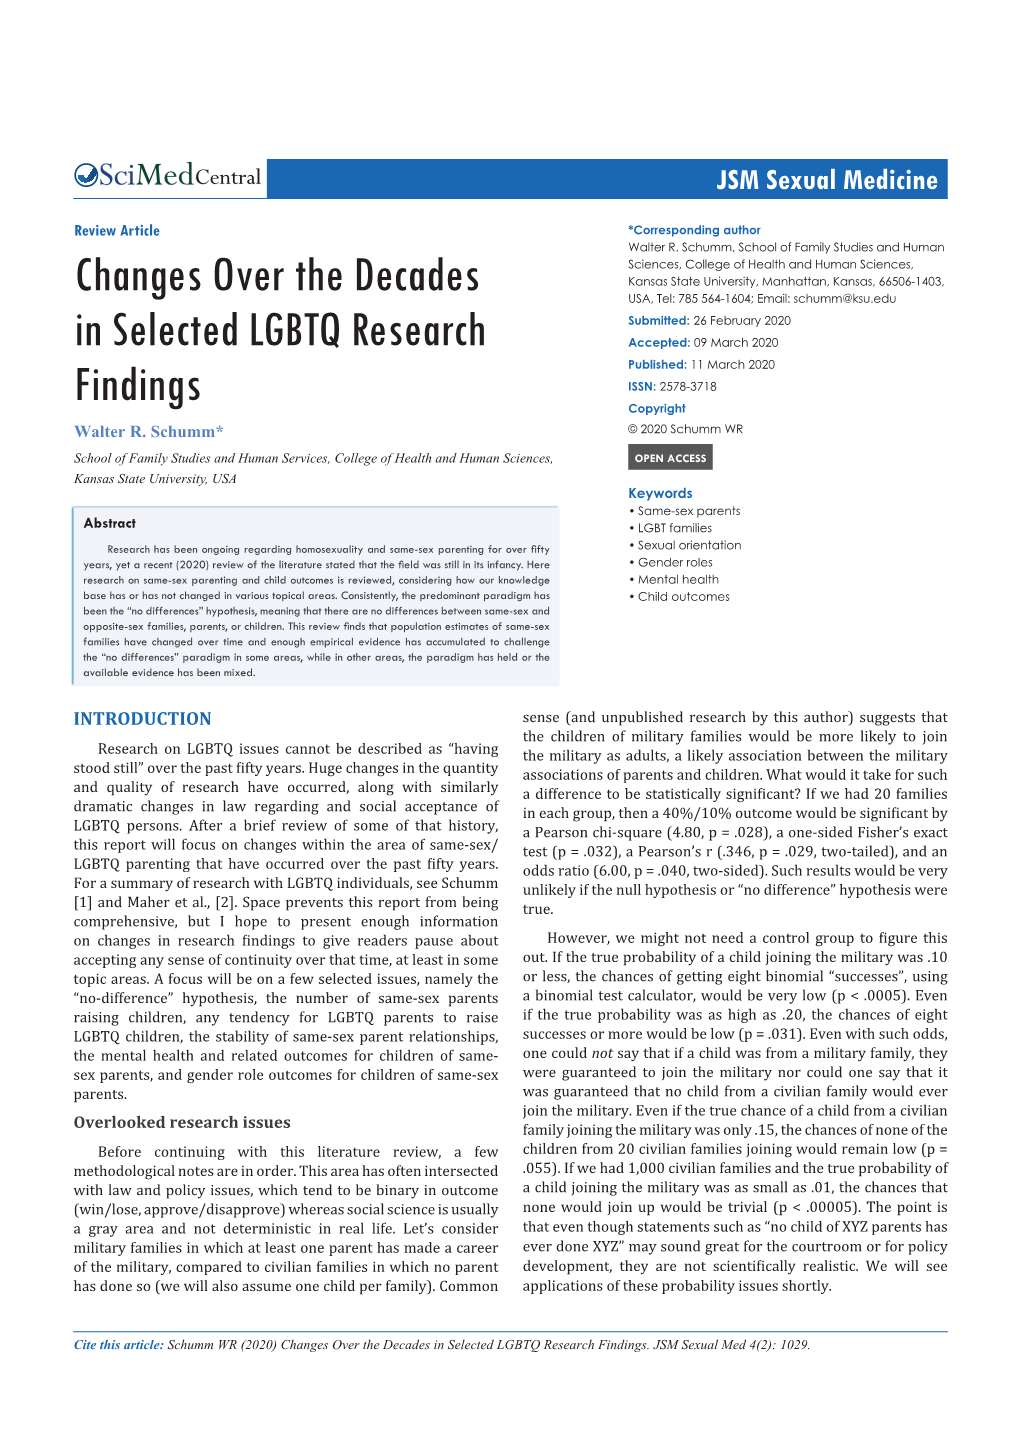 Changes Over the Decades in Selected LGBTQ Research Findings